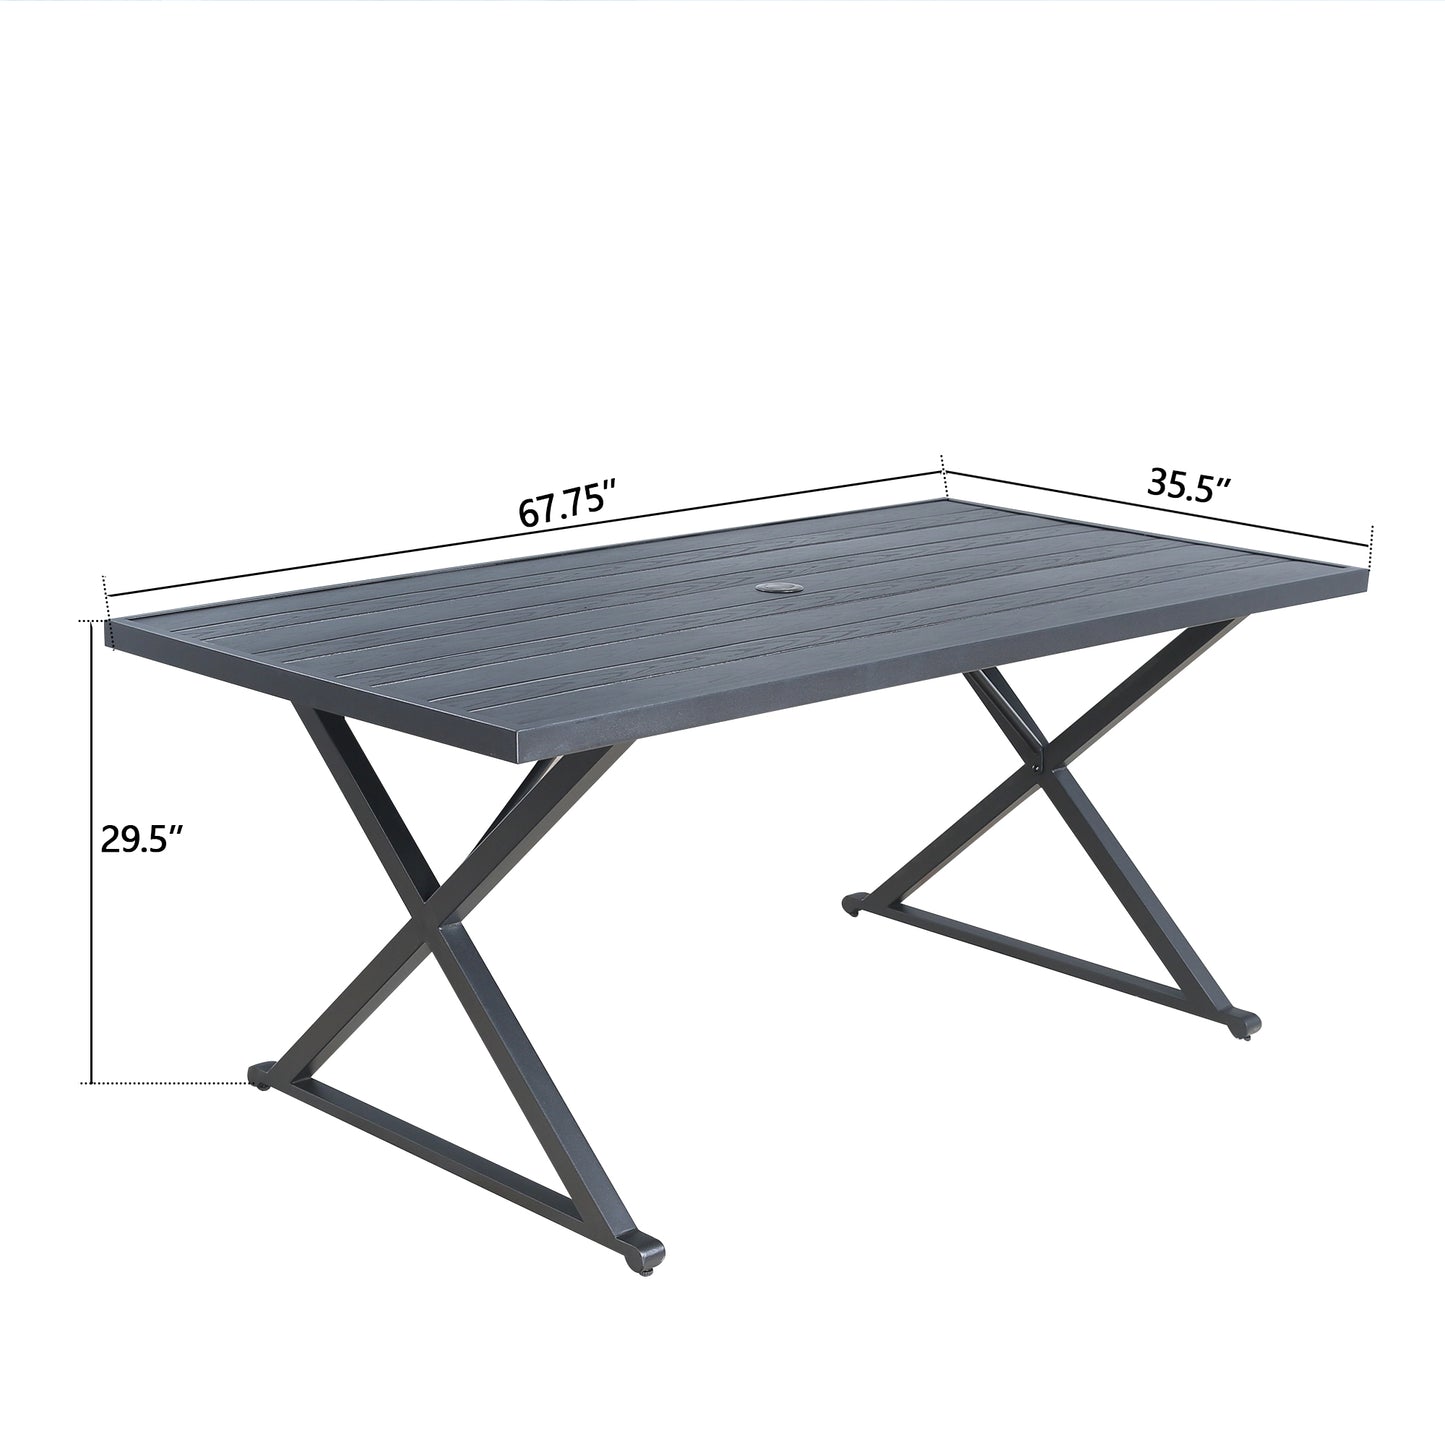 Rectangular 67.75"L Patio Metal Dining Table with Steel Slatted Wooden Textured Tabletop, Cross Legs and 1.57” Umbrella Hole for 6 Person